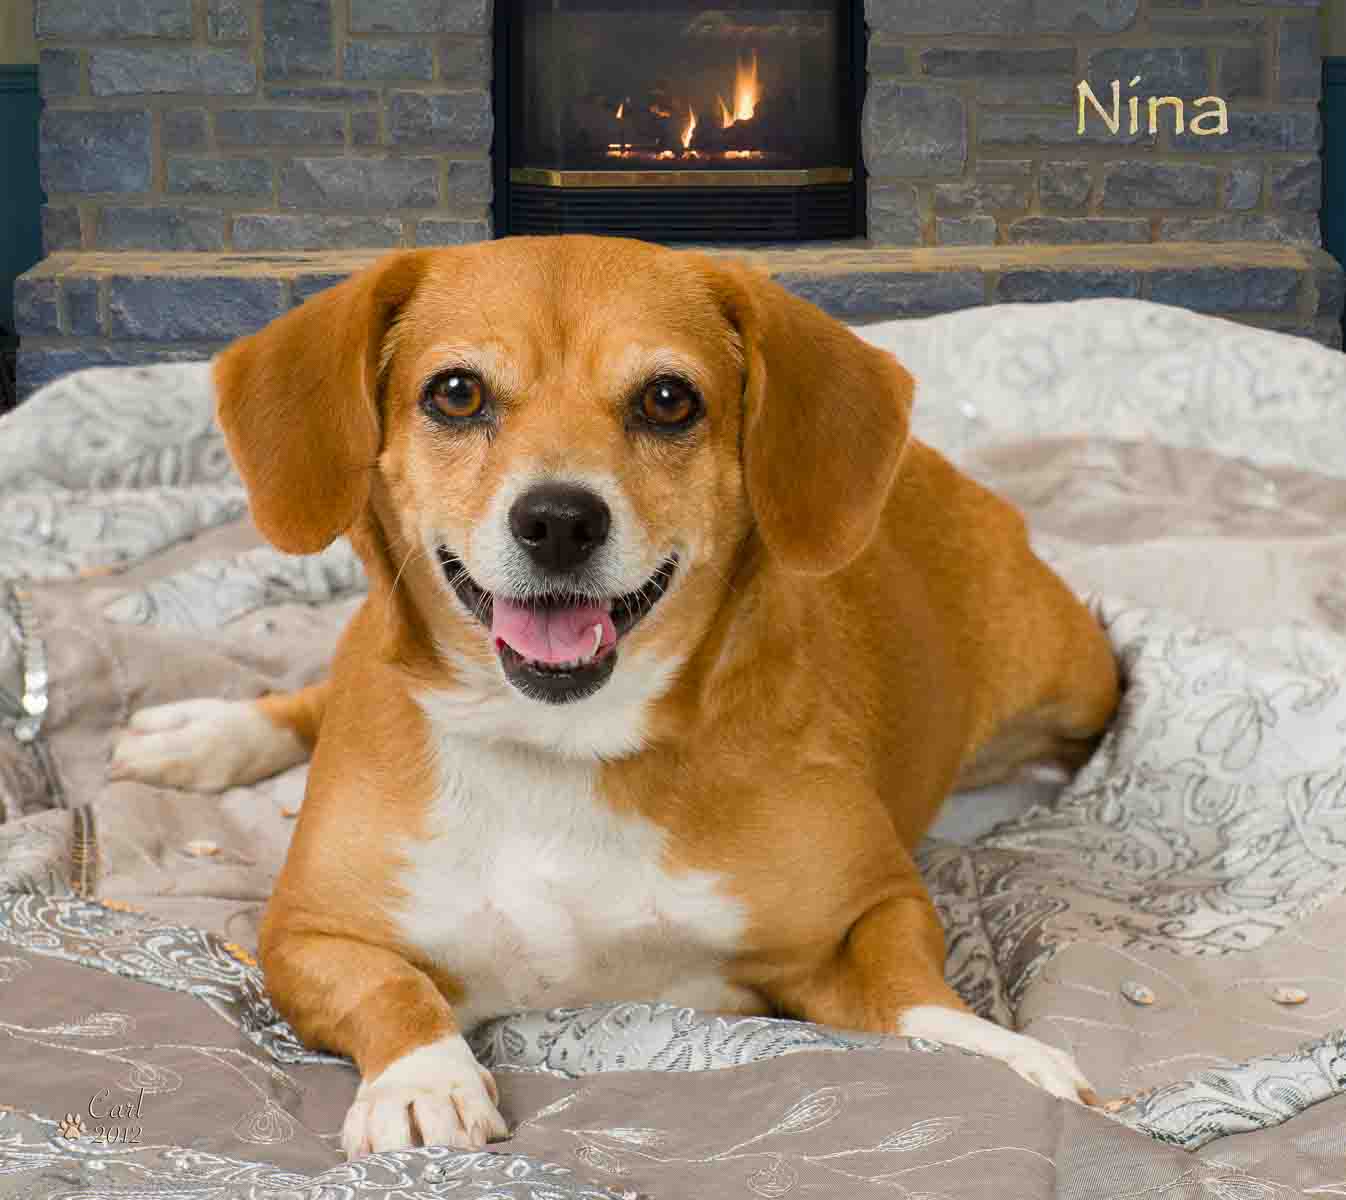 A dog laying on the bed in front of a fireplace.